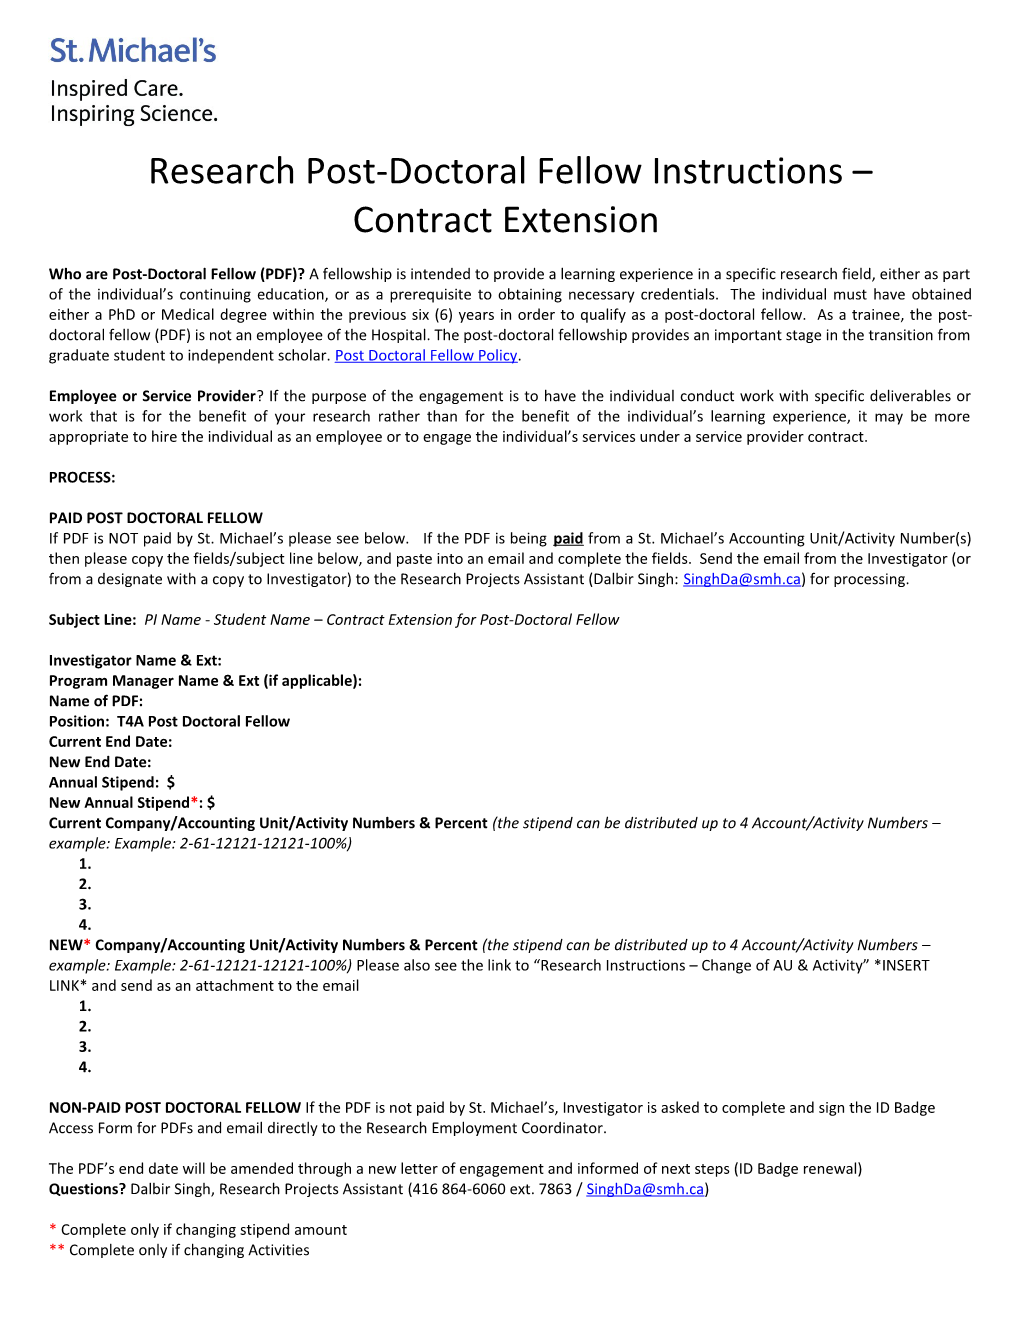 Research Post-Doctoral Fellow Instructions